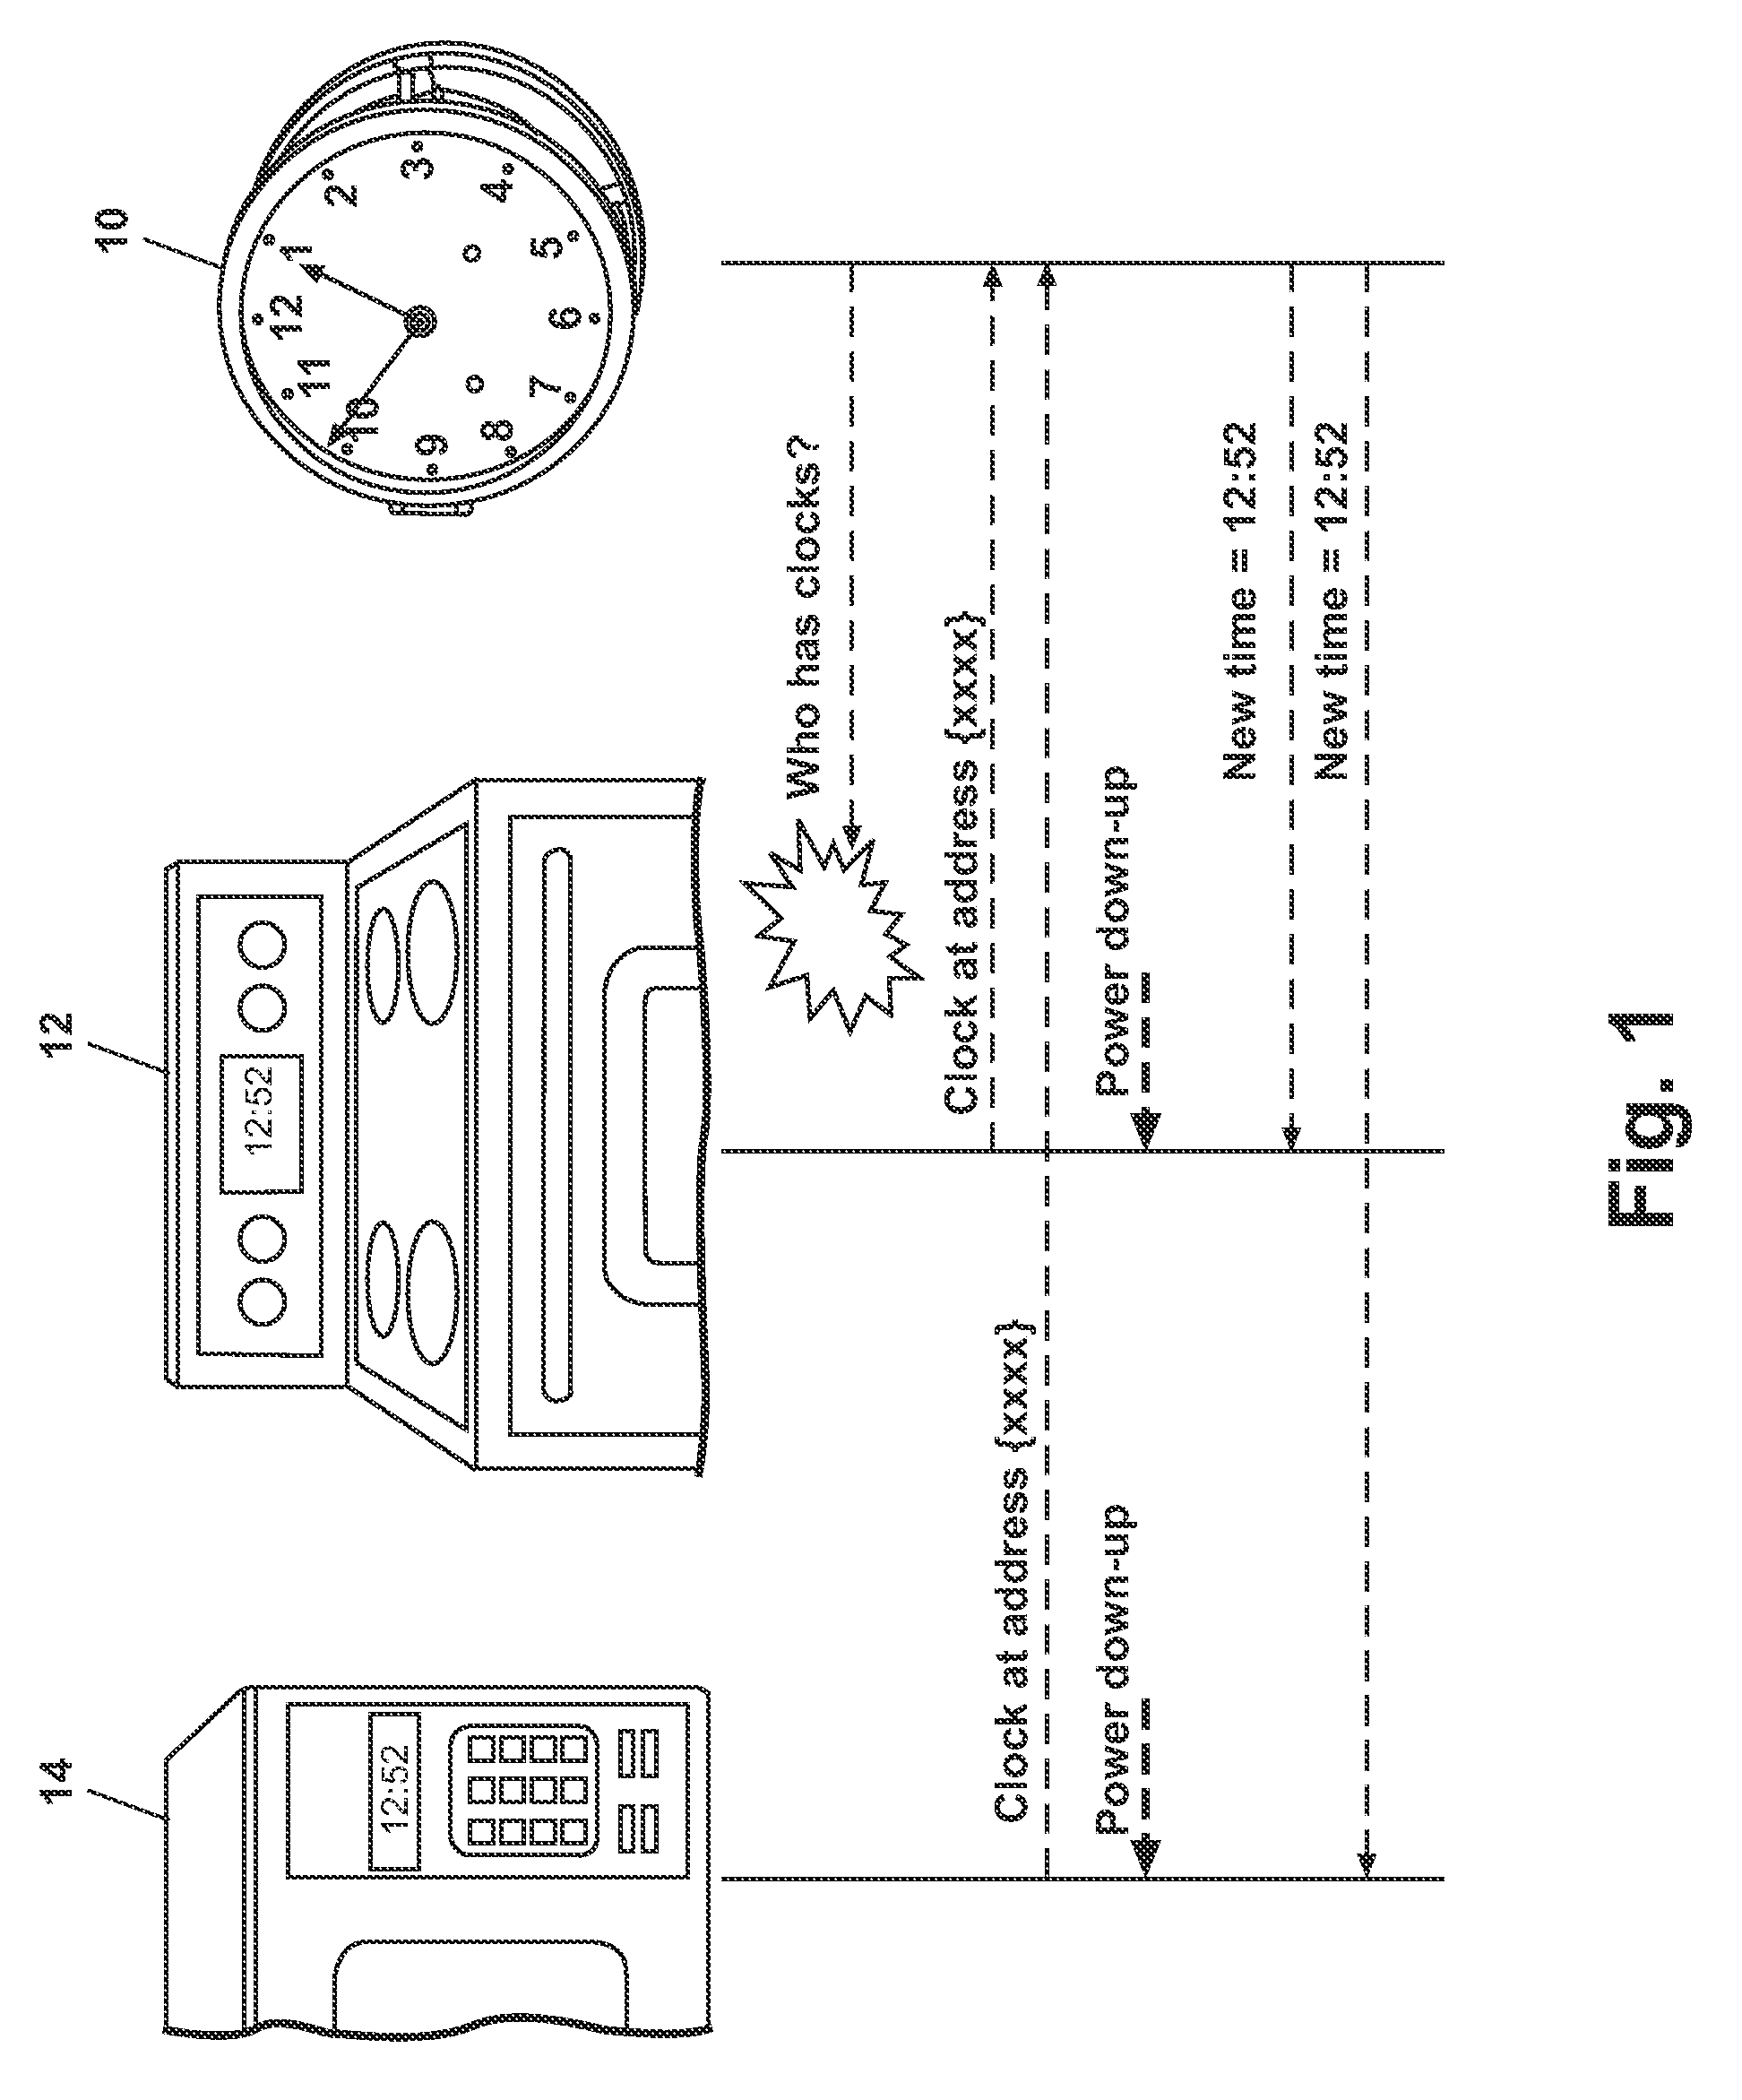 Network for communicating information related to a consumable to an appliance